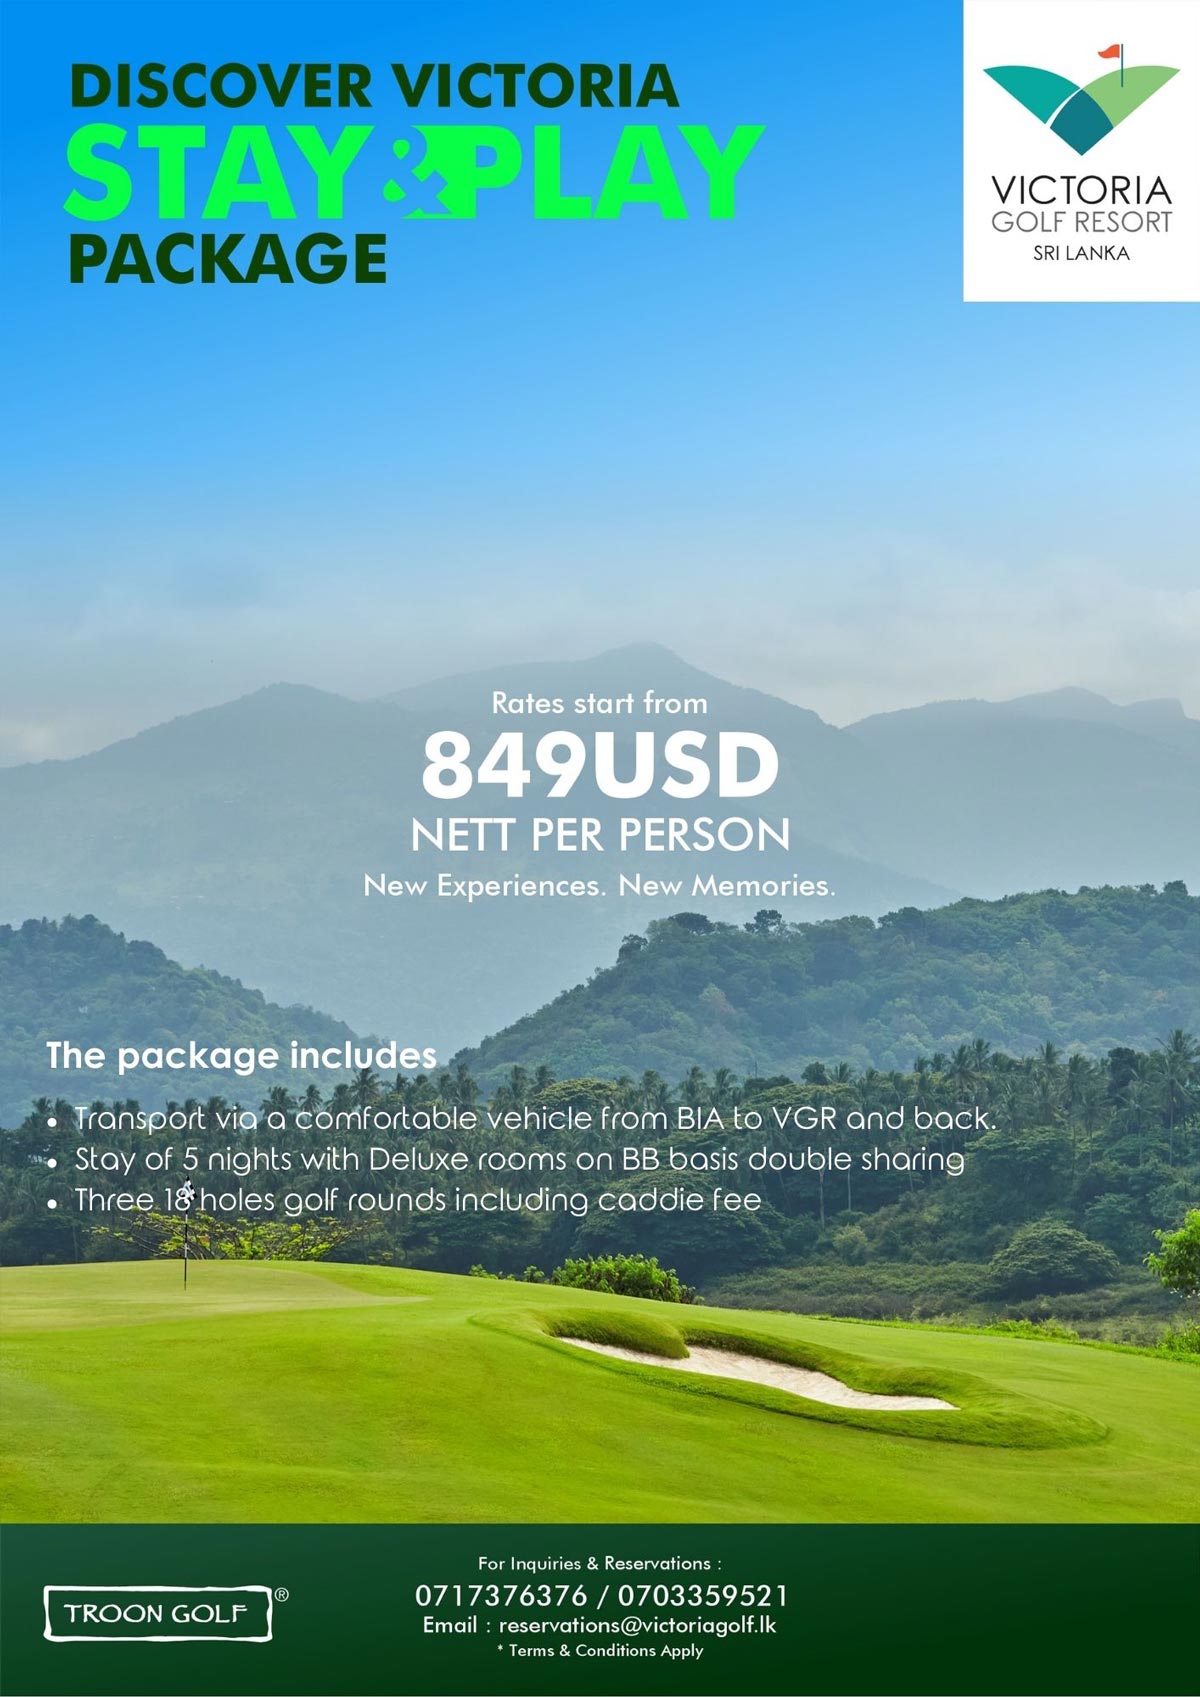 Stay & Play package for 849 USD